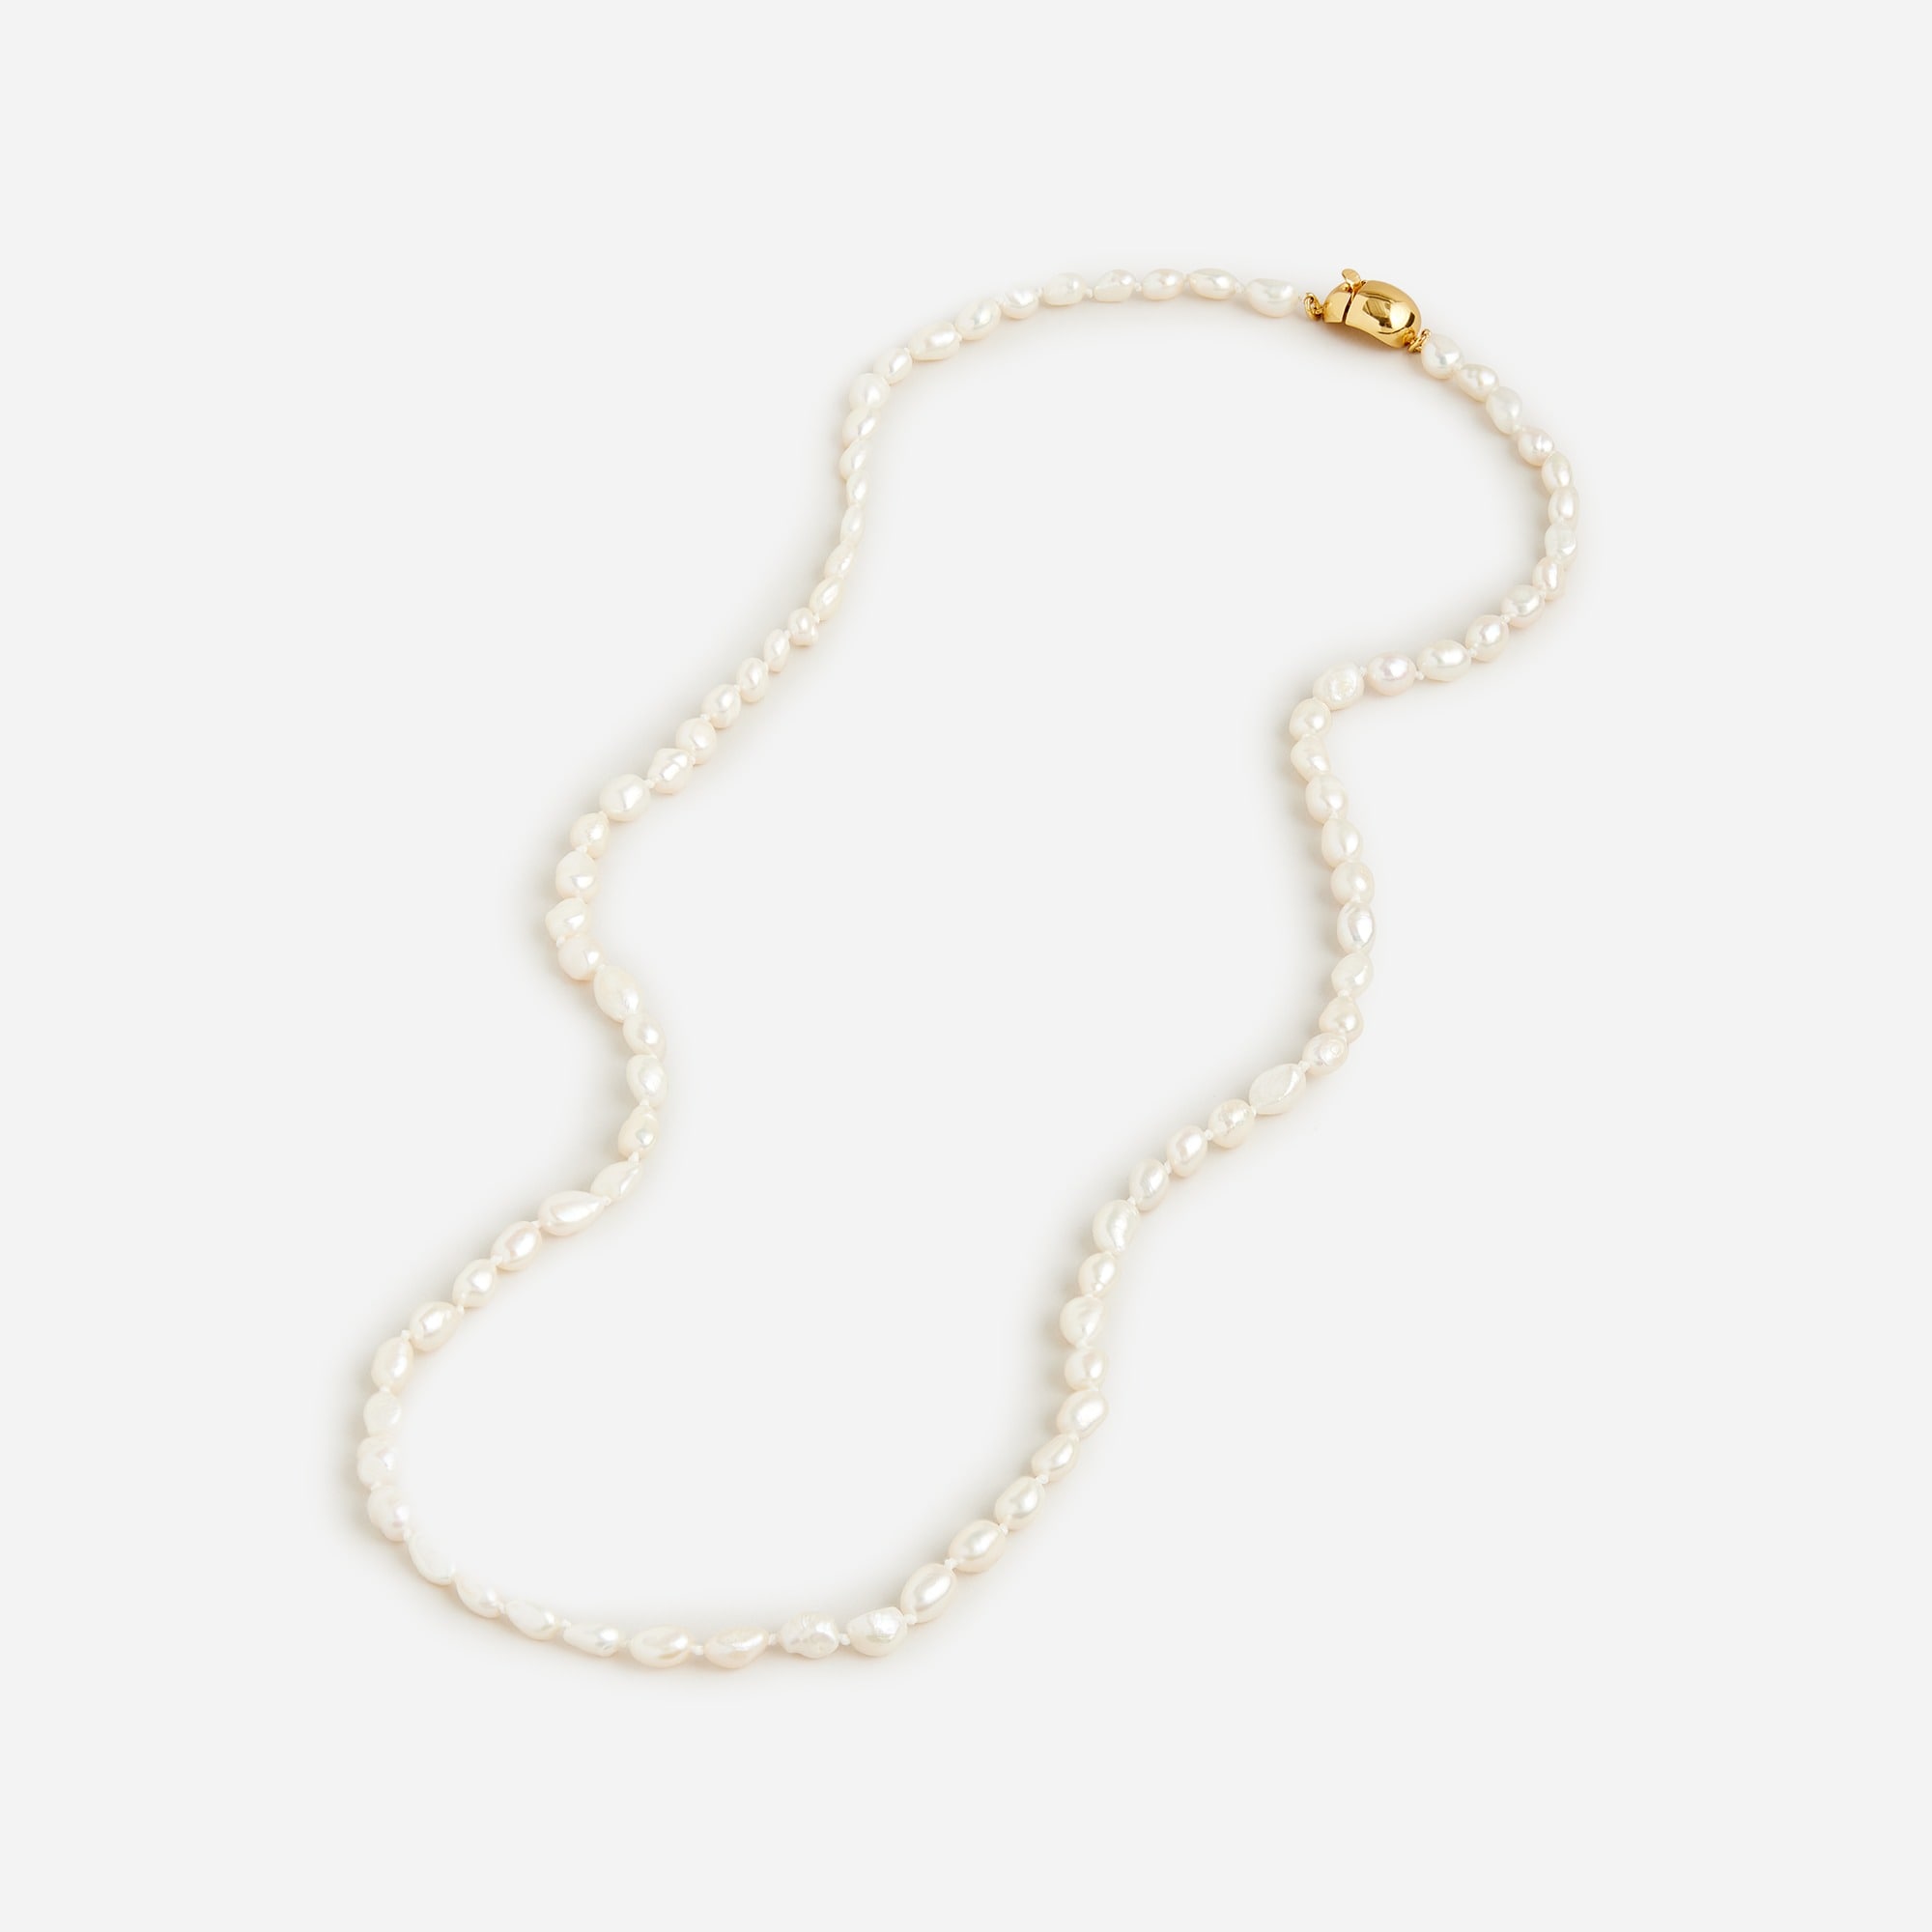  Long freshwater pearl and gold necklace